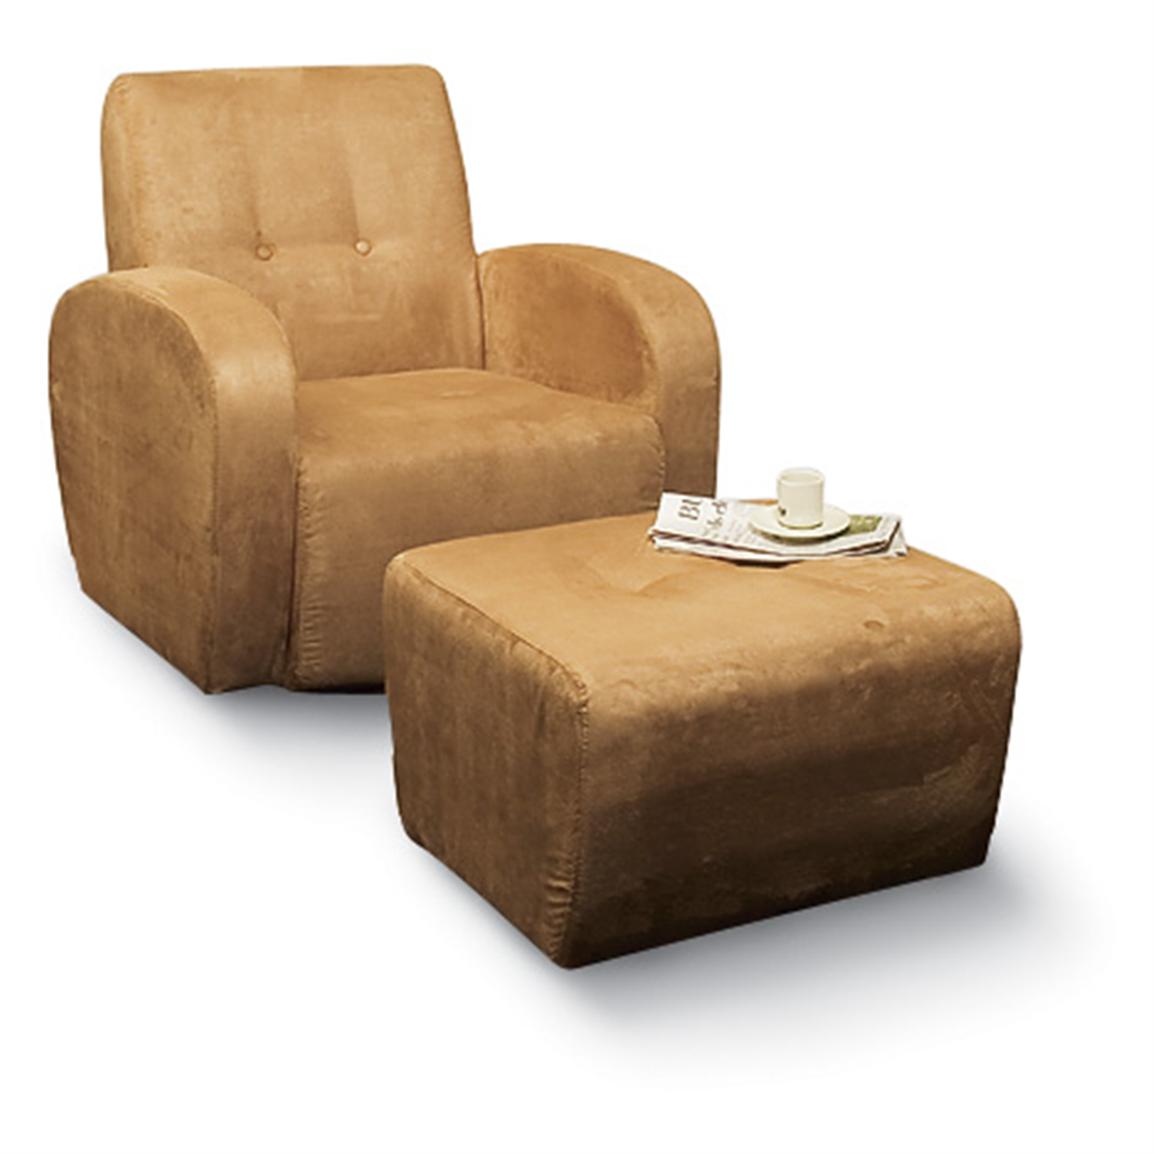 Elise Ottoman - 132392, Living Room at Sportsman's Guide